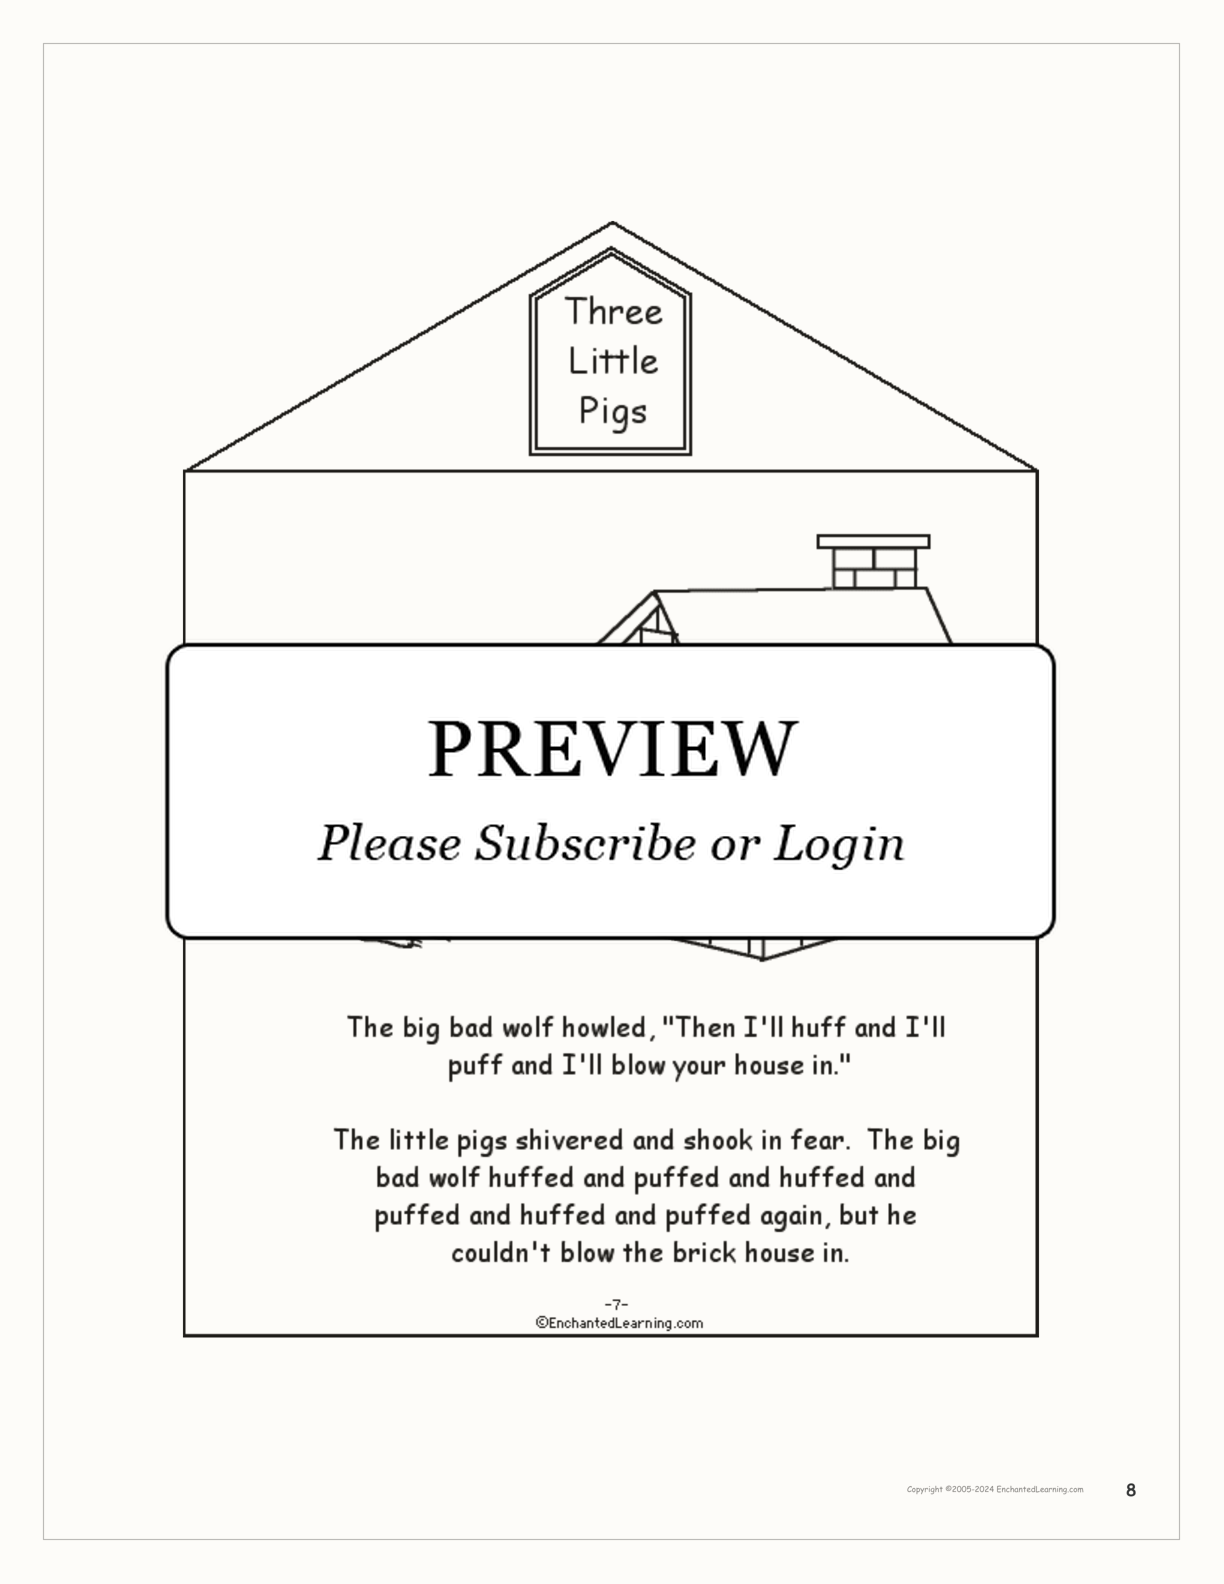 Three Little Pigs - Printable Book interactive printout page 8